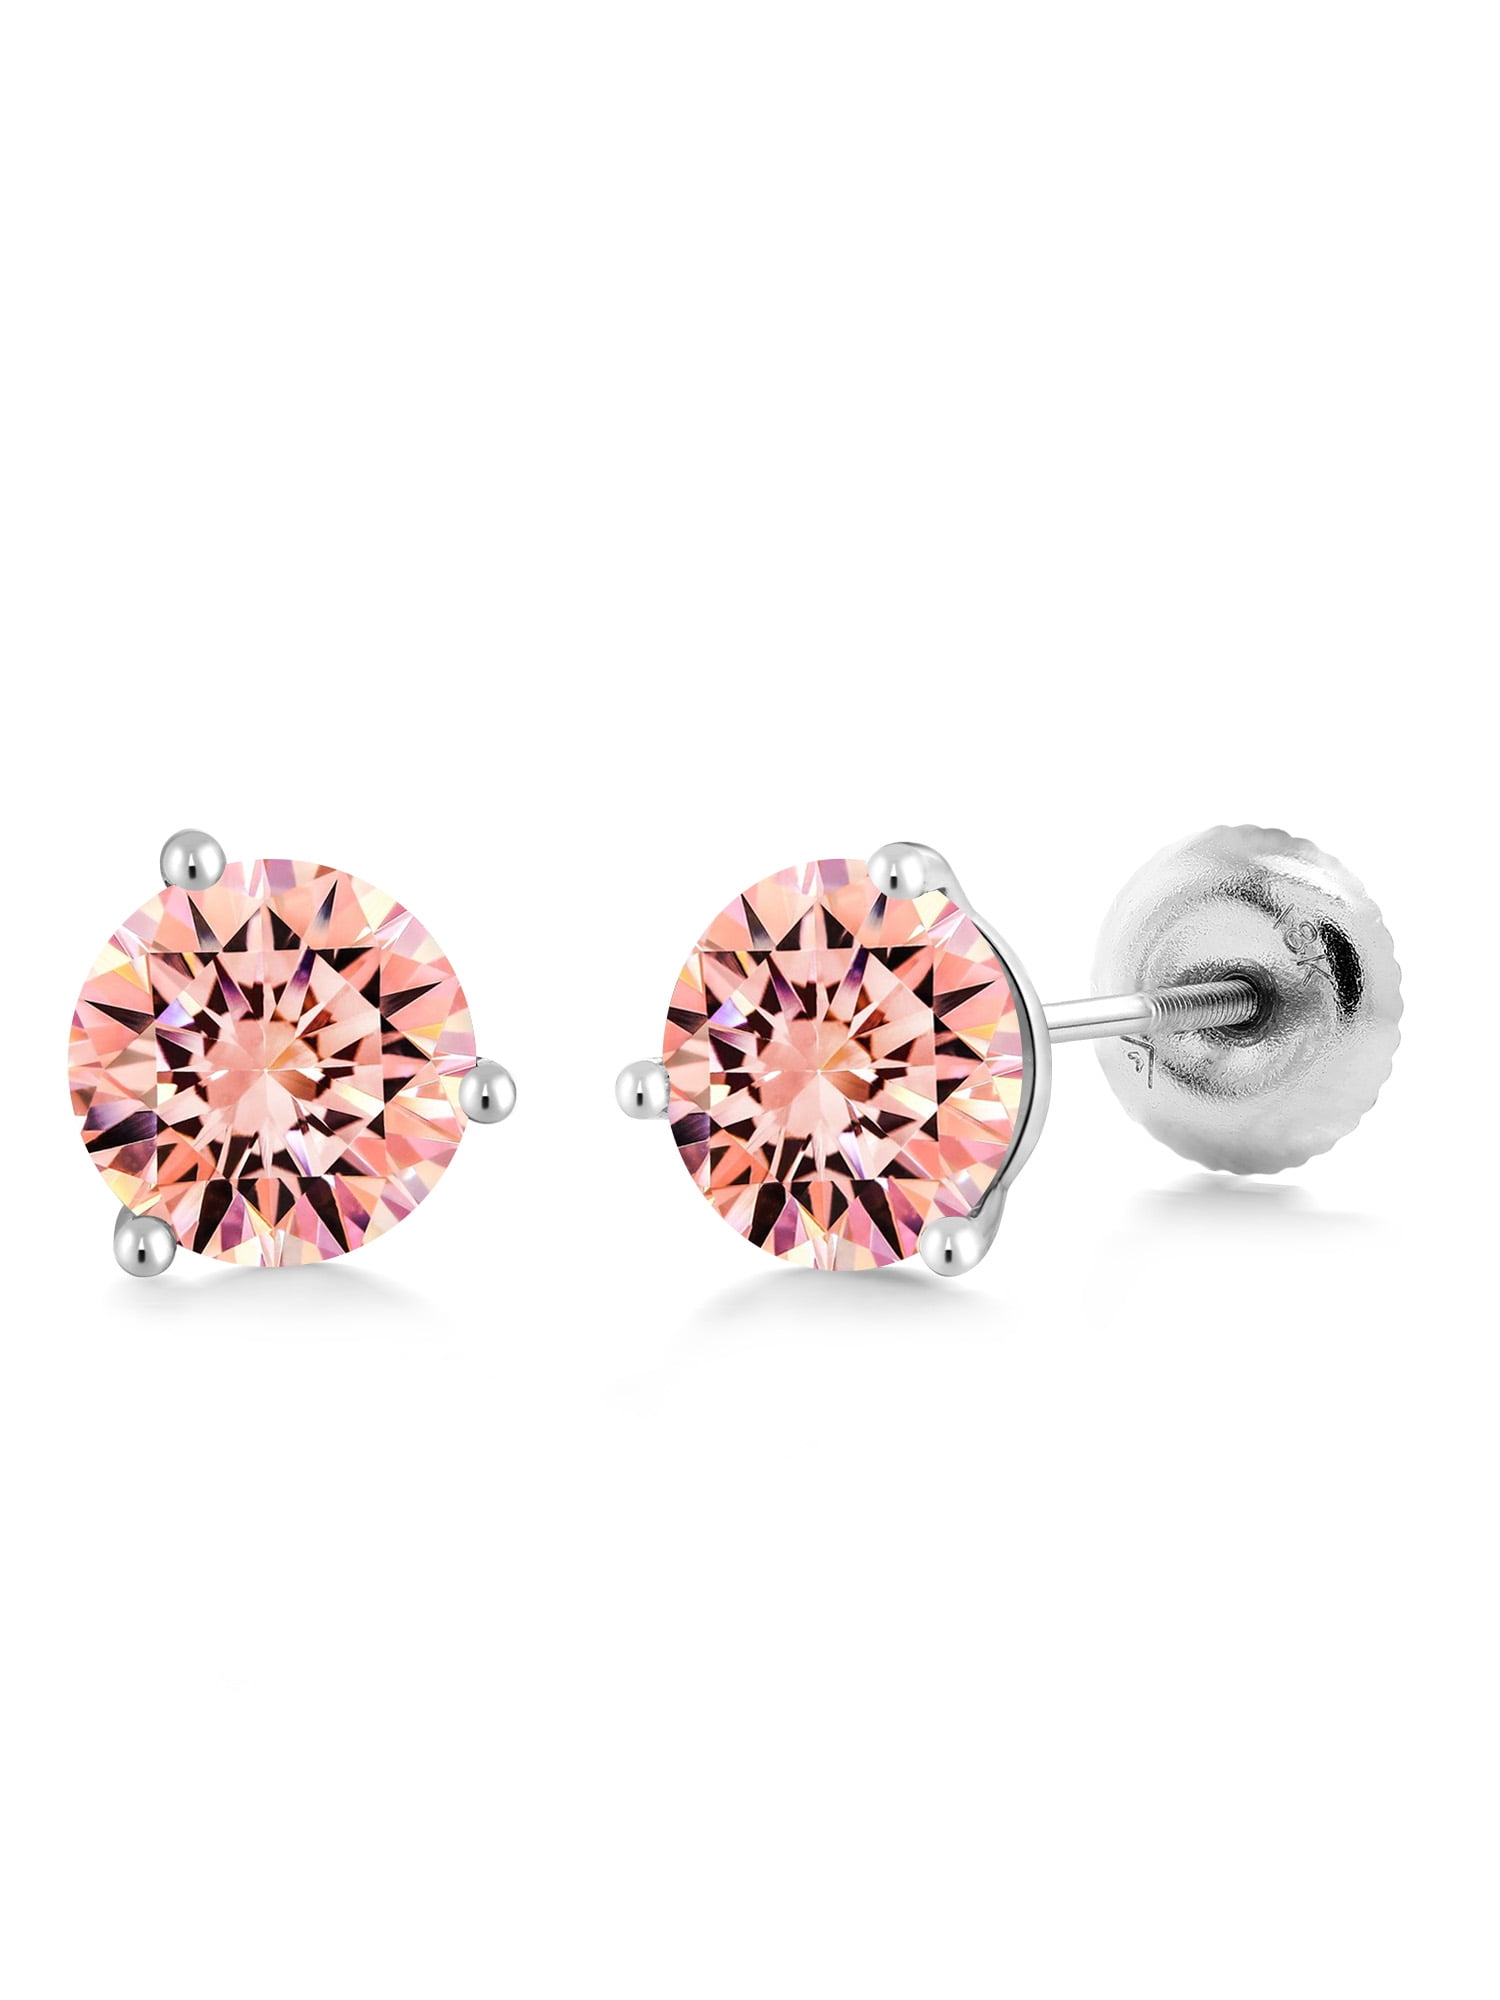 Gem Stone King 18K Yellow Gold Plated Silver Stud Earrings Made with Pink Swarovksi Zirconia